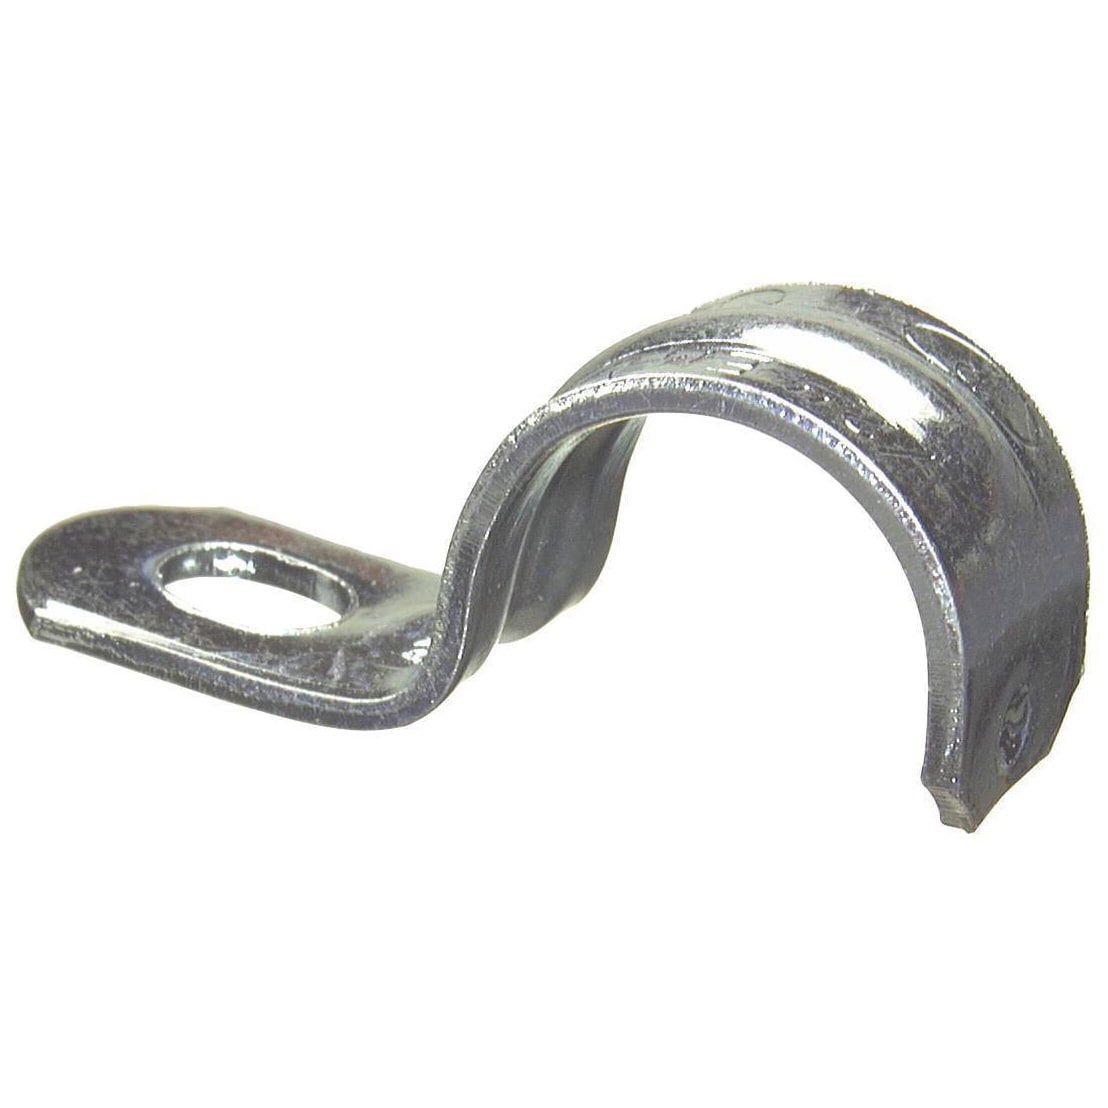 Halex 26151 25 Count 1/2-Inch Steel One-Hole Strap 